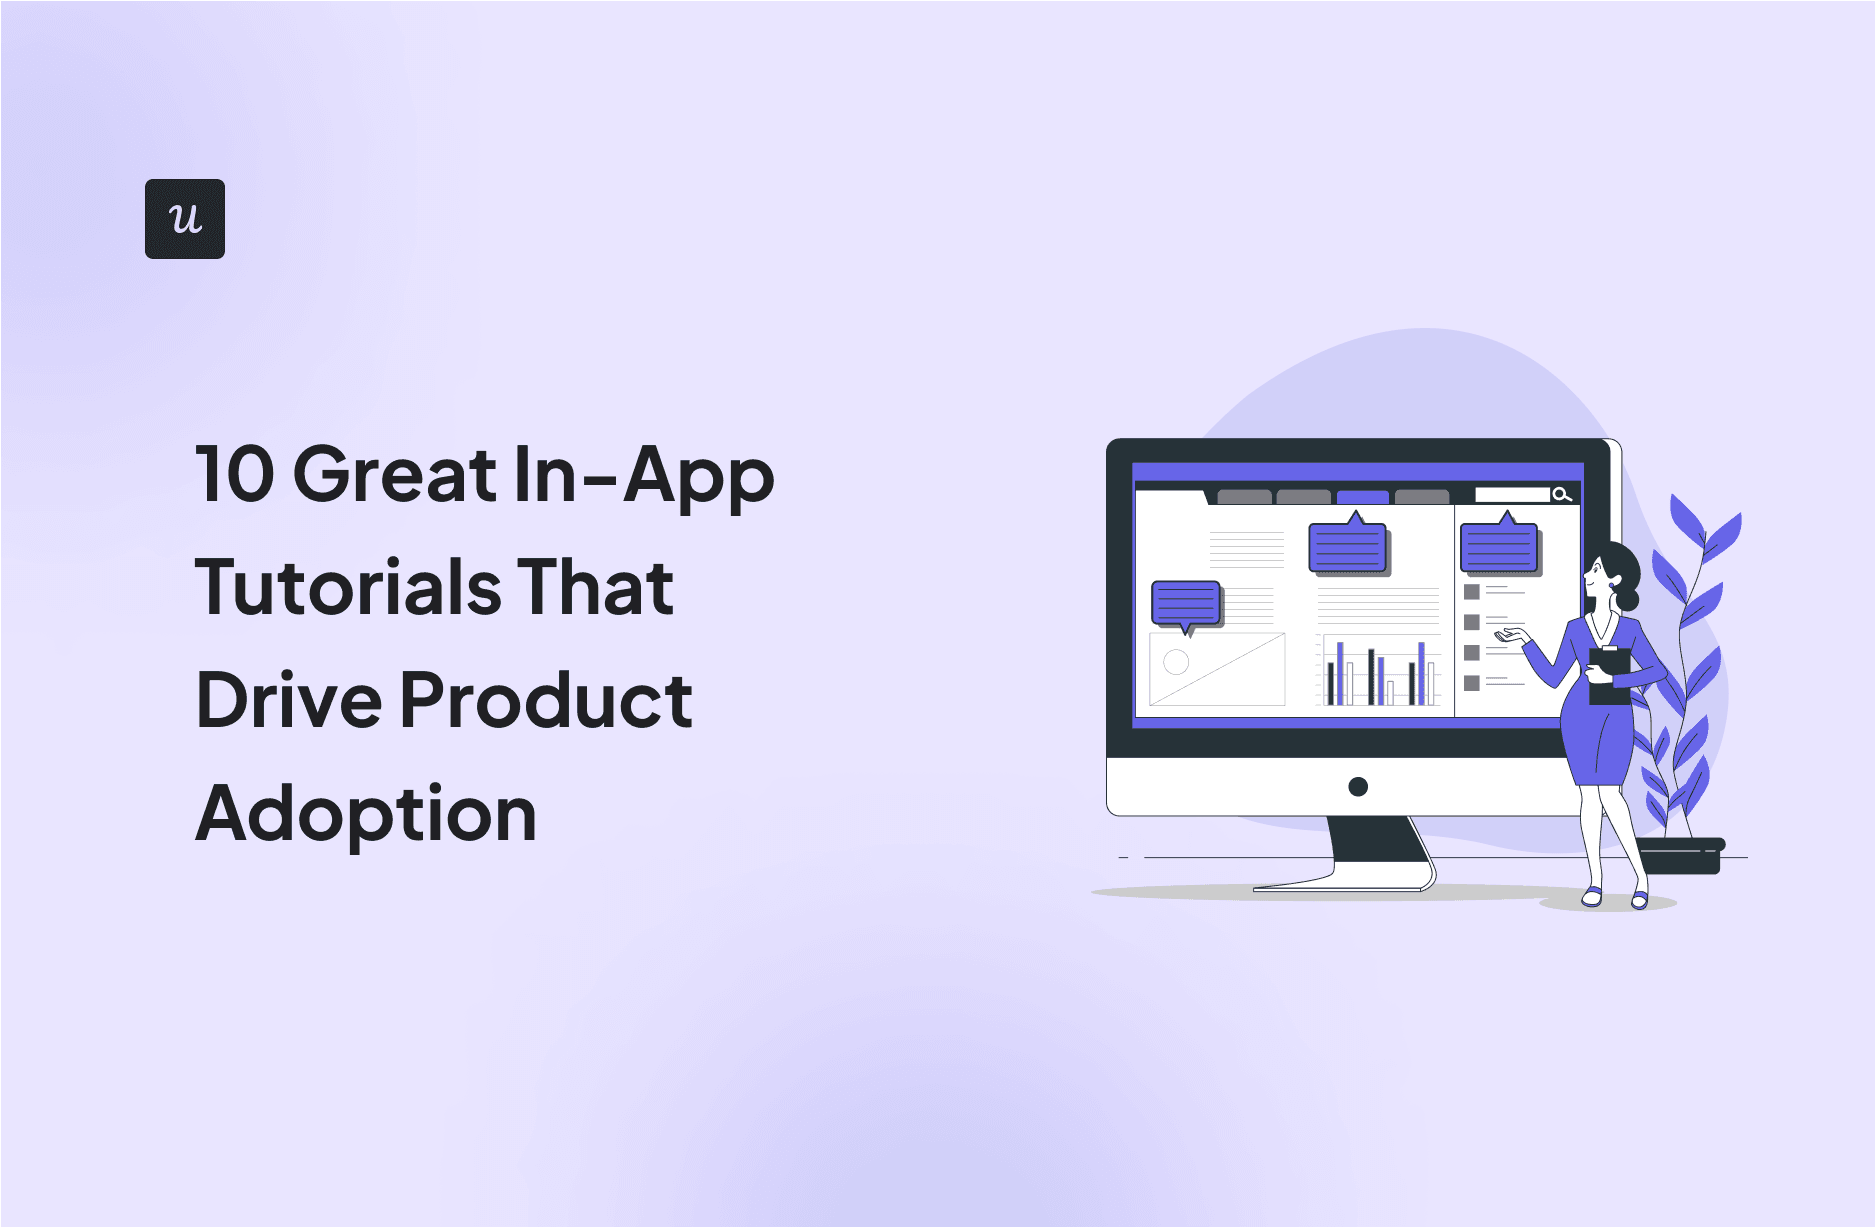 10 Great In-App Tutorials That Drive Product Adoption cover